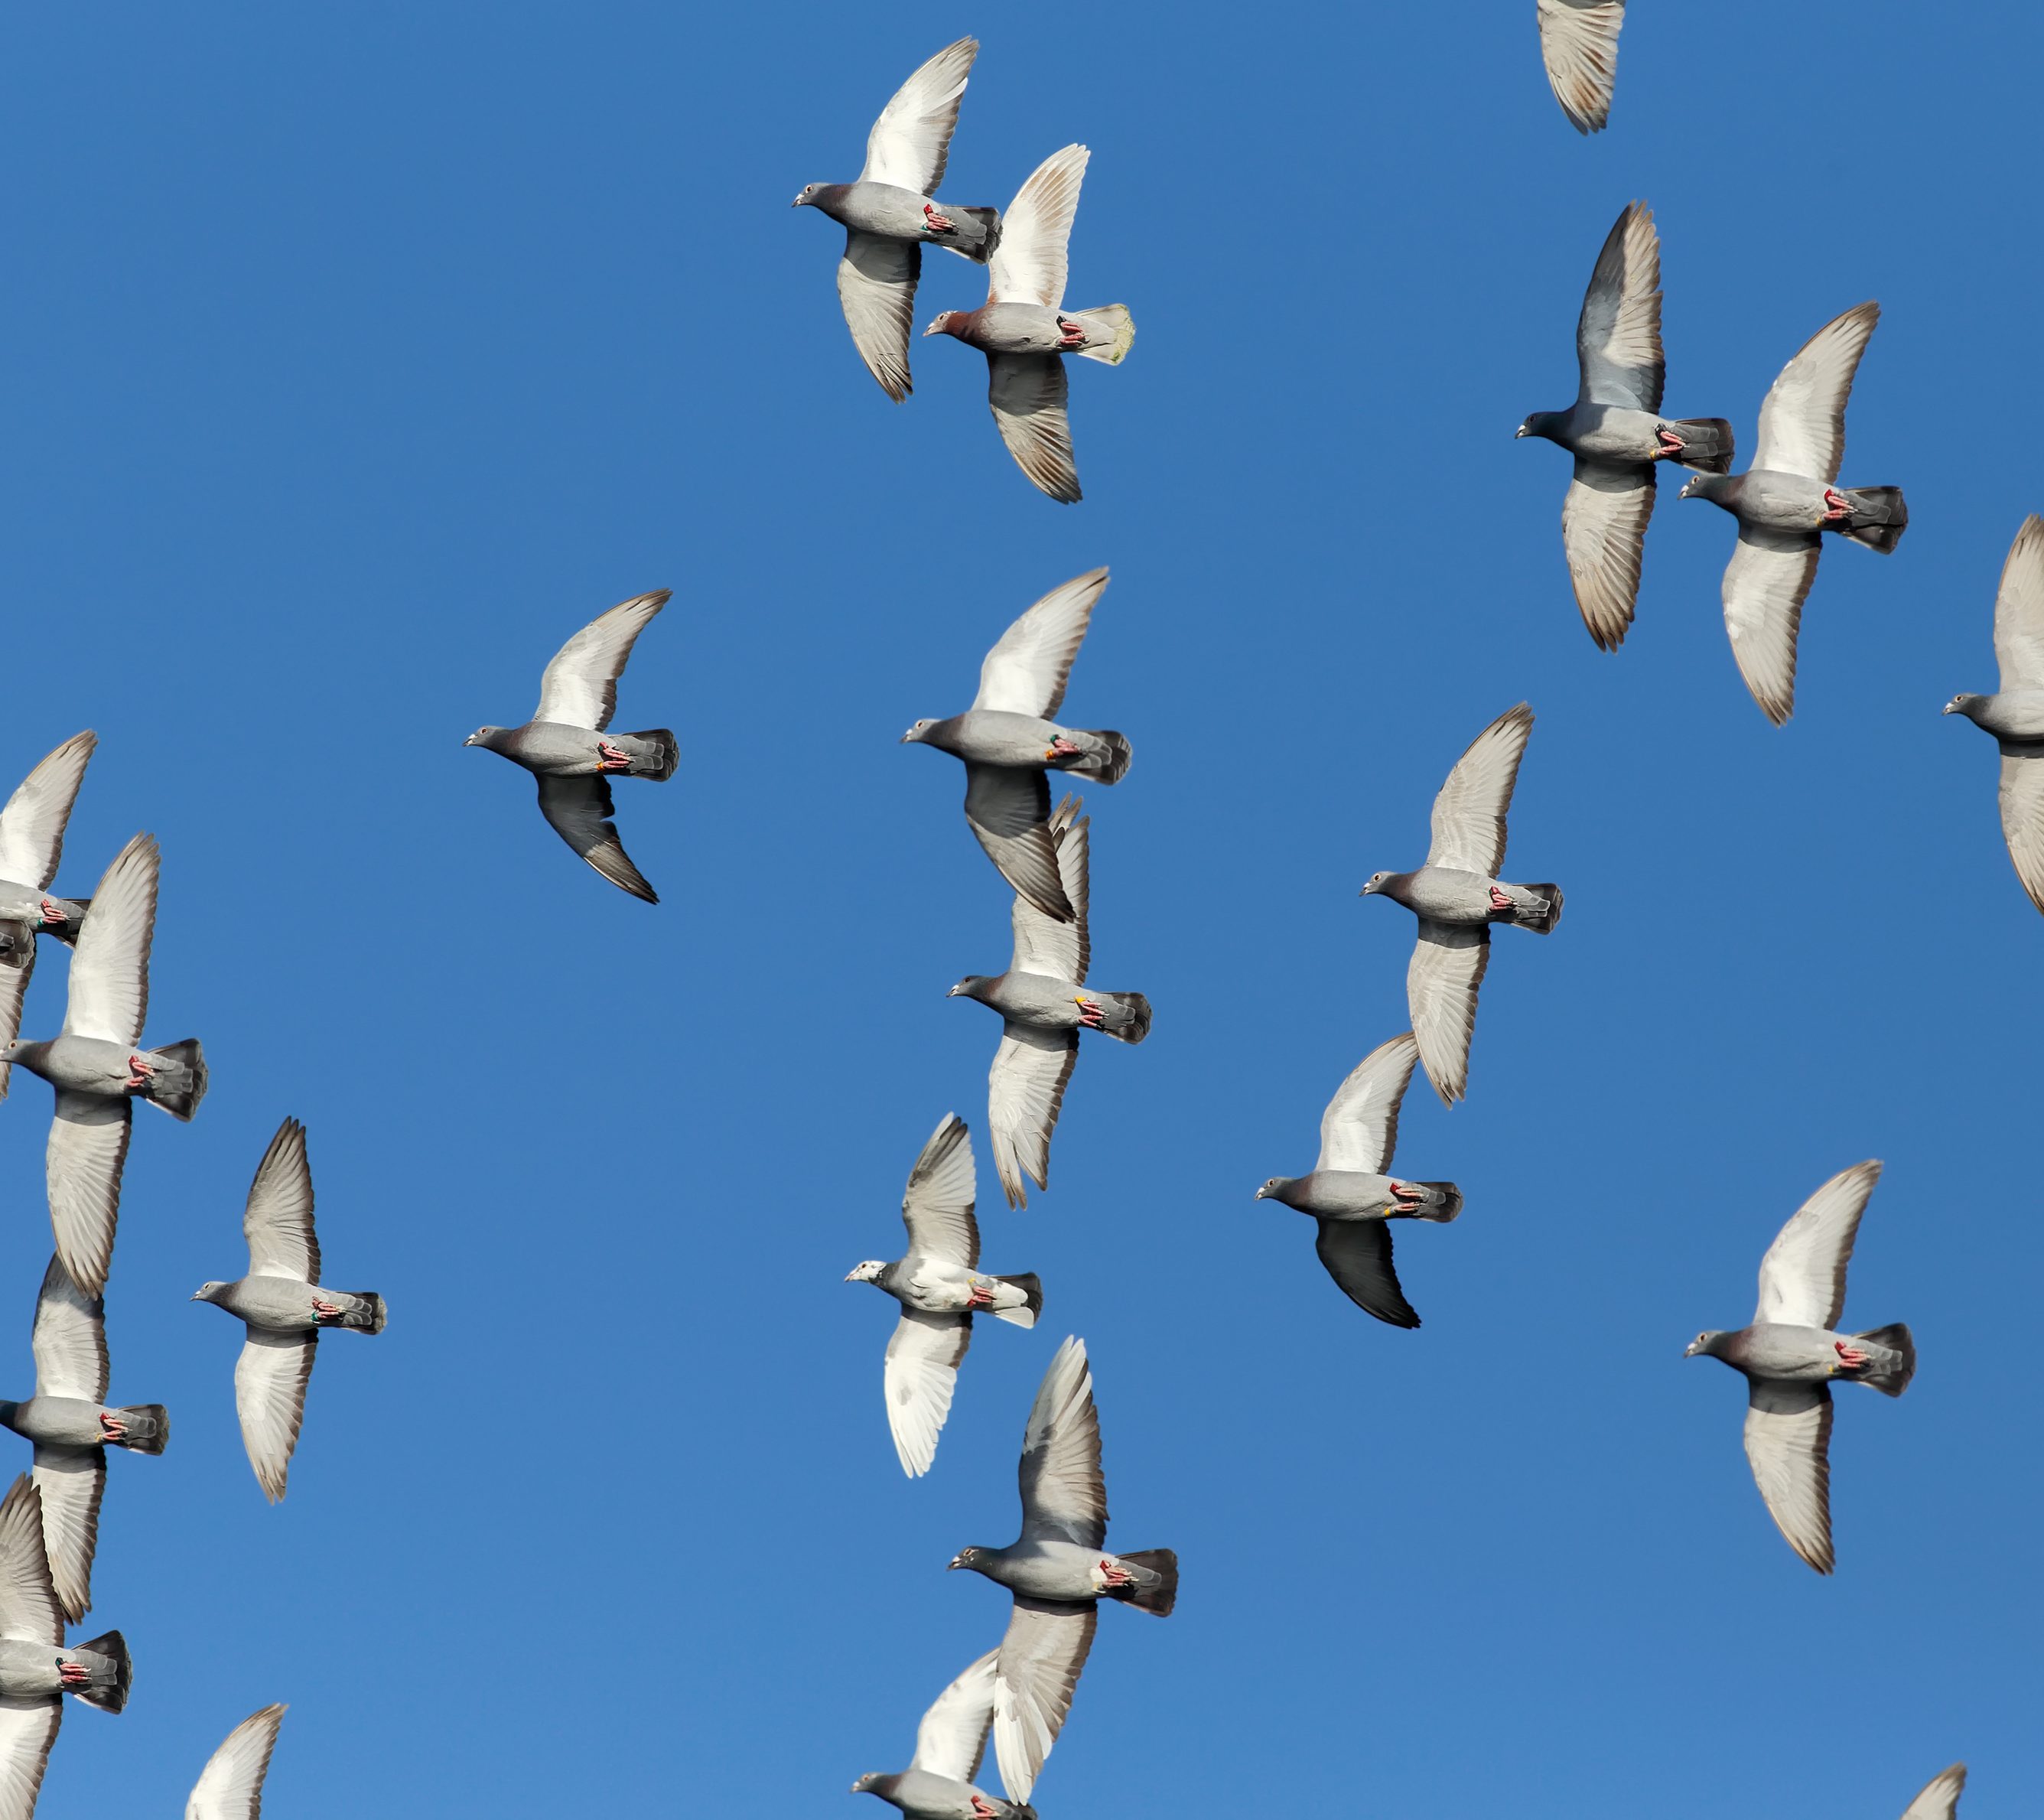 Flock of sport carrier pigeons flying against a beautiful deep blue sky during their daily trainning for competition